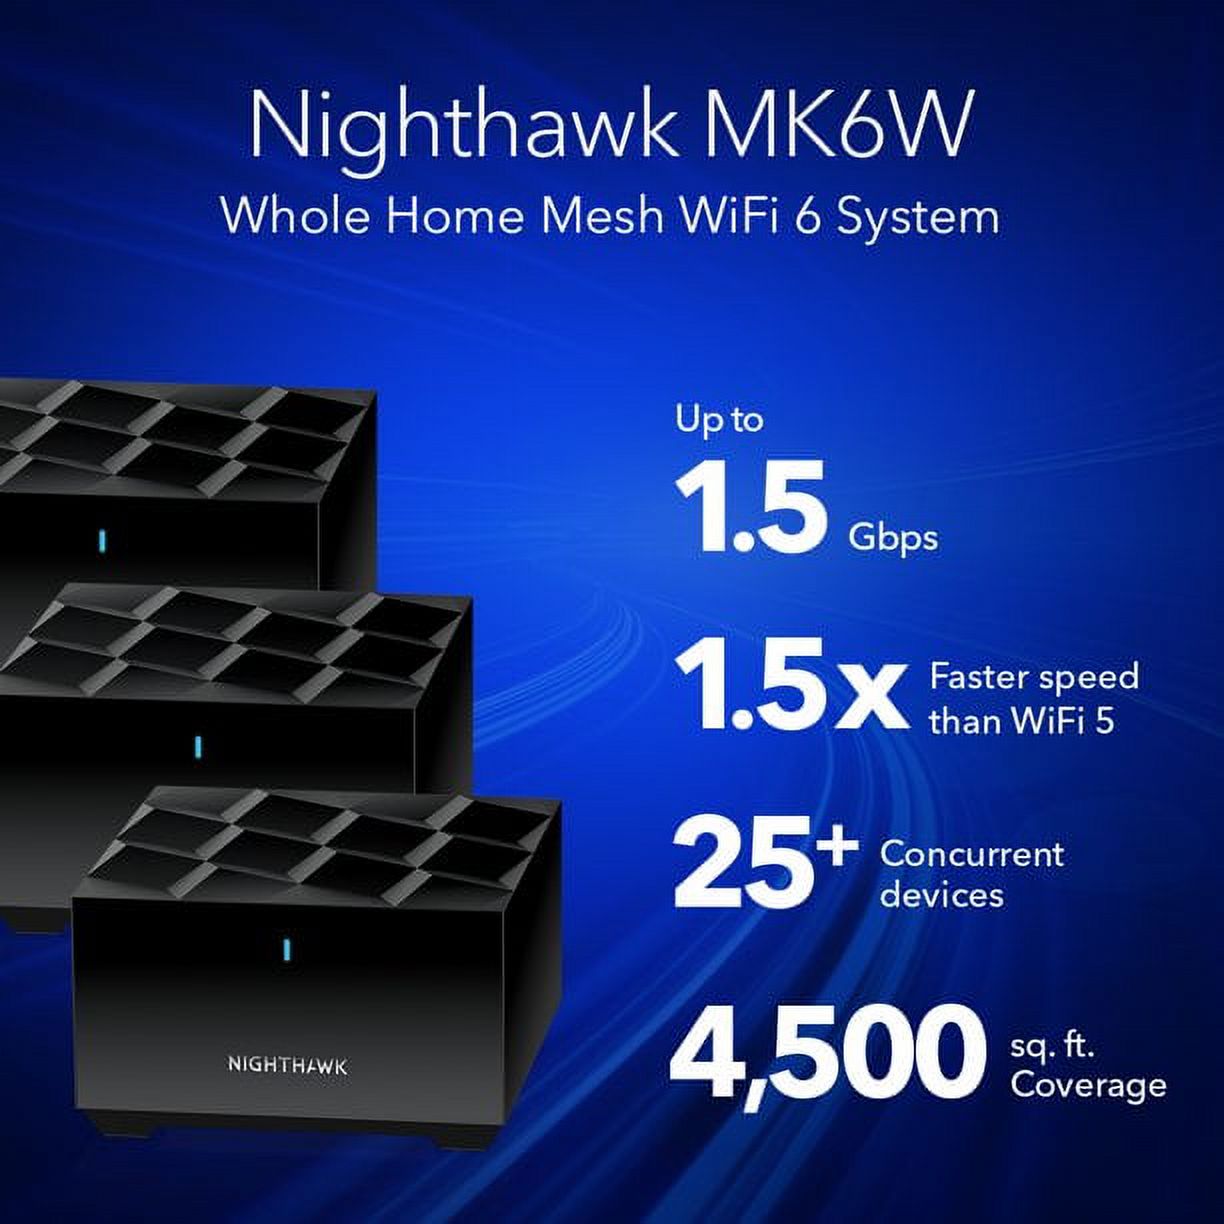 NETGEAR Nighthawk Dual-Band WiFi 6 AX1500 Mesh System 1.5 Gbps Router + 2 Satellites (MK6W-100NAS) - image 2 of 6